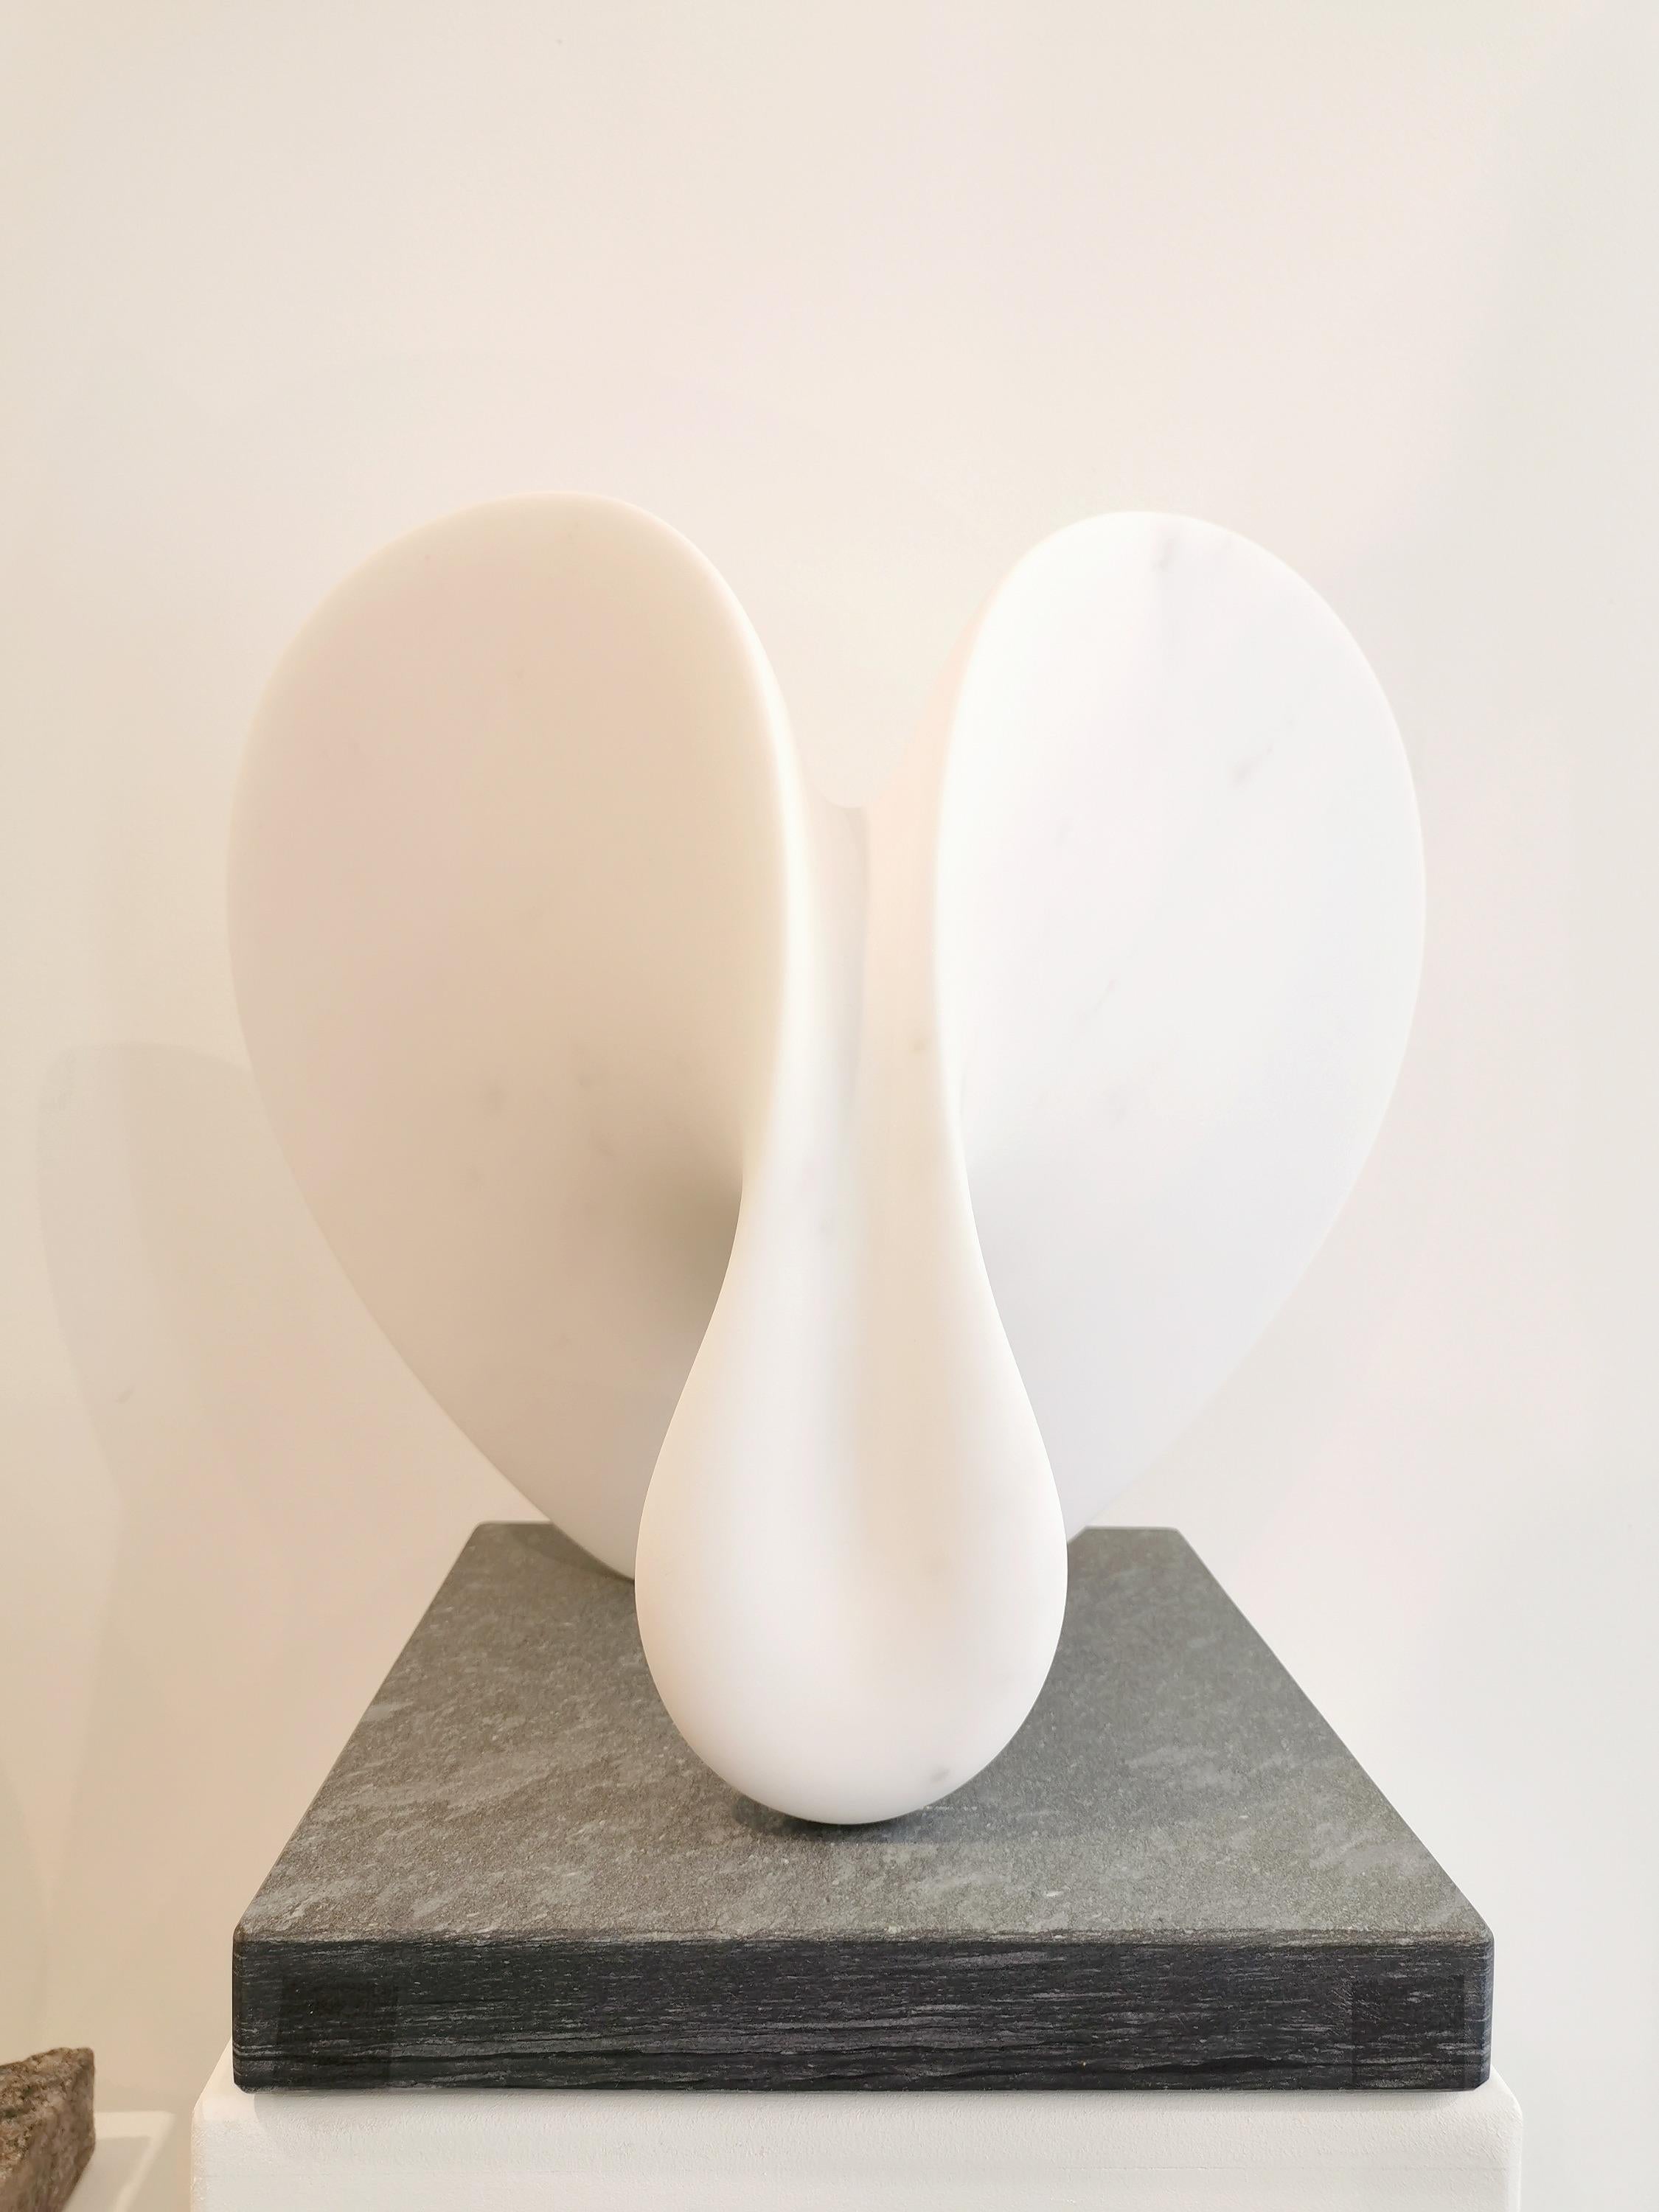 ORCHID By Cynthia Sah 
Statuary 
Carrara white marble and marble base 
Measures: 16,70’’ x 9,80’’ x 14’’ 
One-off in these dimensions 
Signed and delivered with a certificate of authenticity

Born in Hong Kong in 1952, Cynthia Sah grew up in Japan